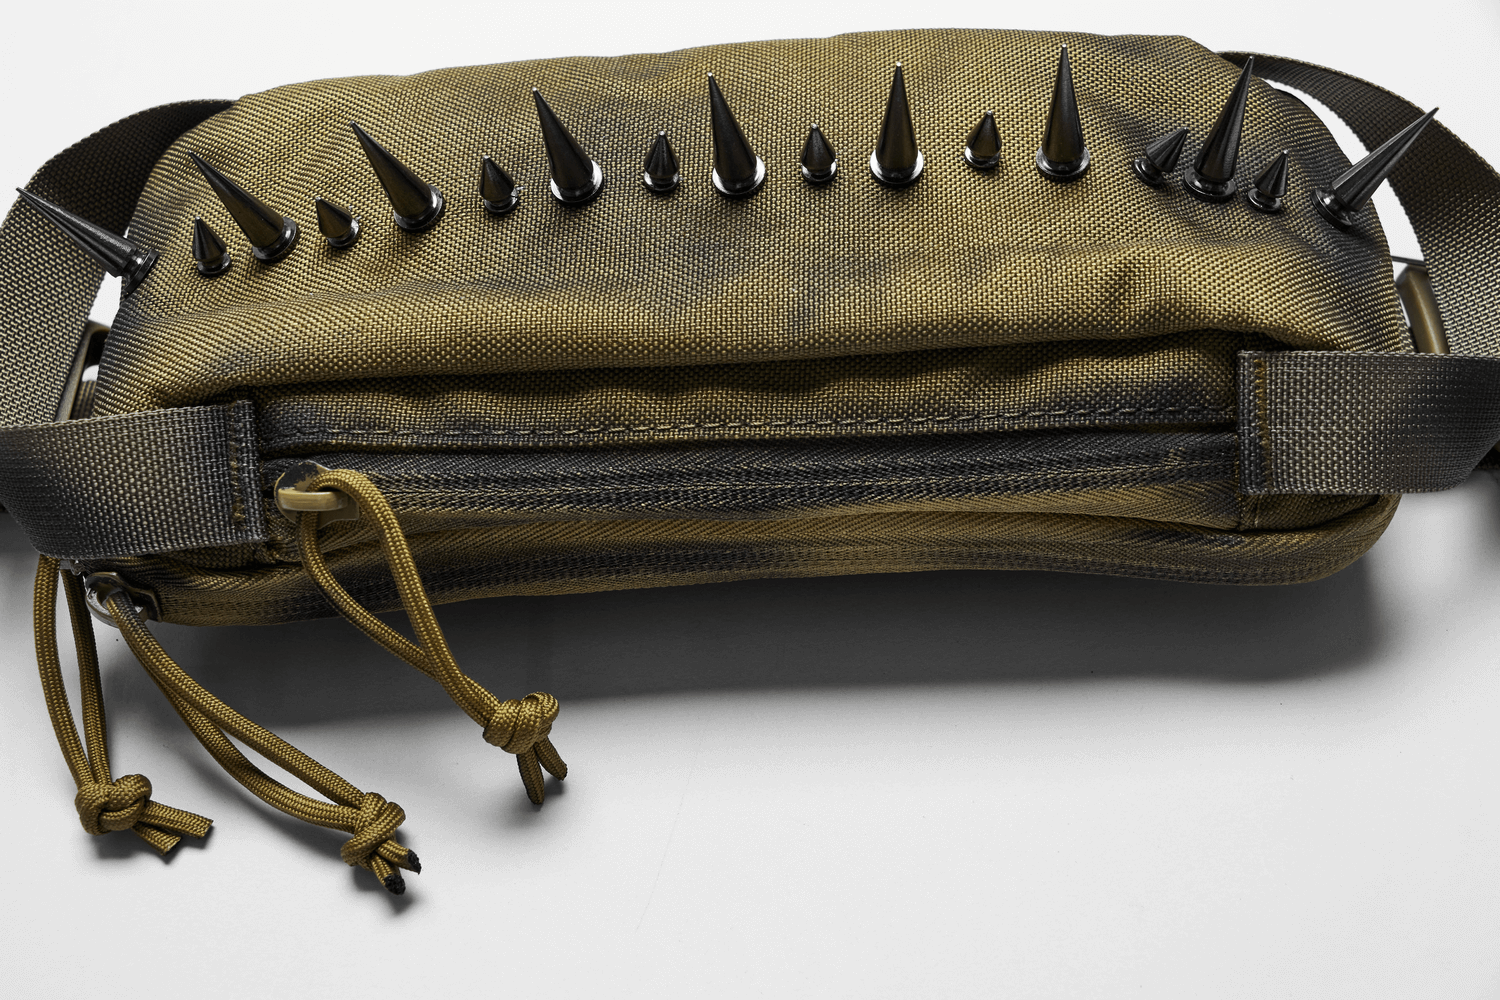 Edgy Nylon Spiked Shoulder Bag for Streetwear